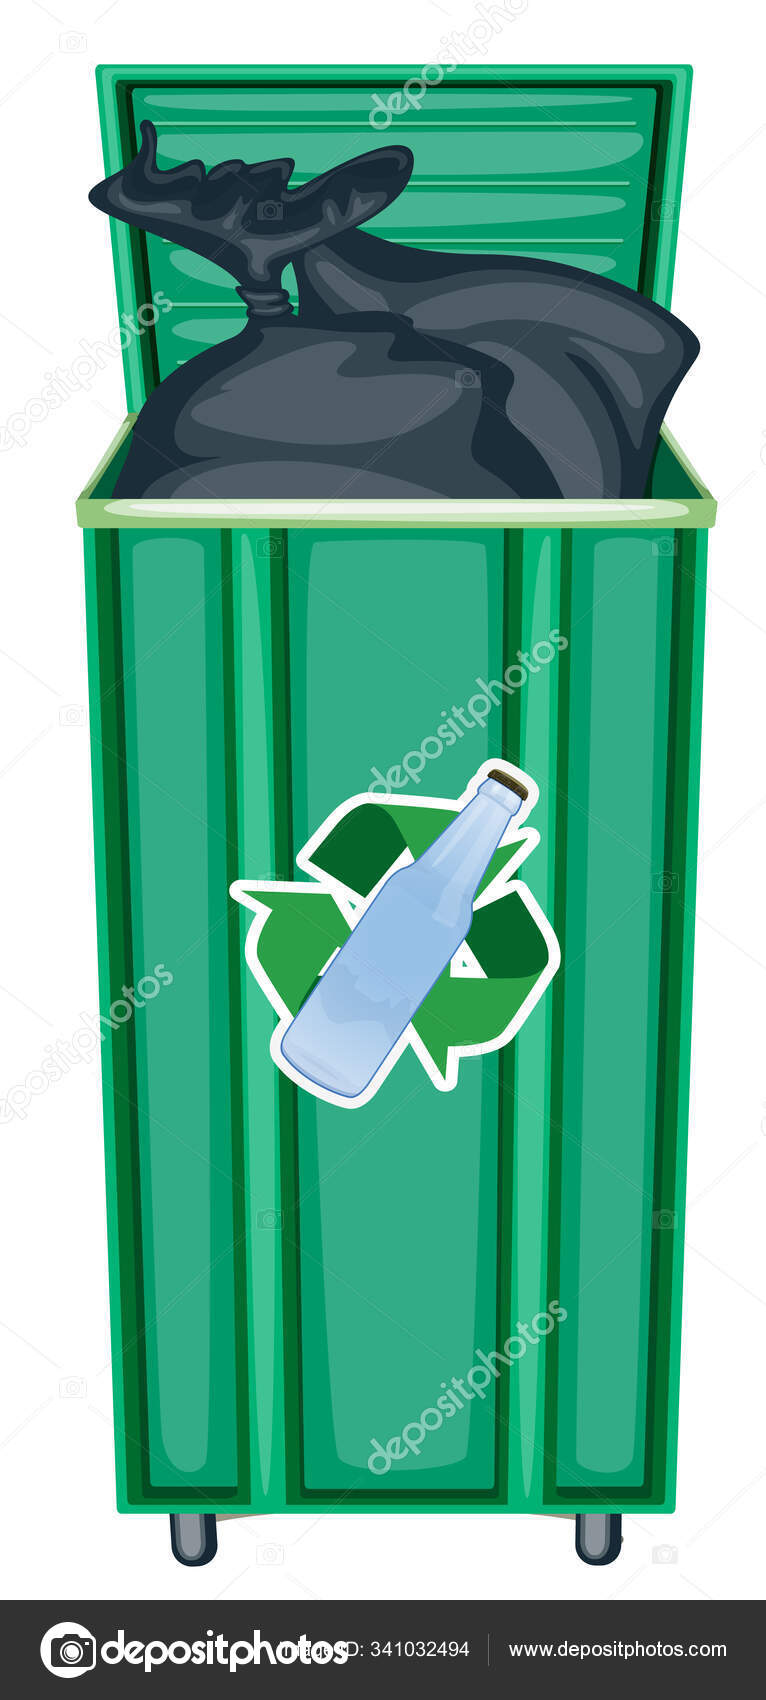 Throwing Trash On Street: Over 3,089 Royalty-Free Licensable Stock  Illustrations & Drawings | Shutterstock